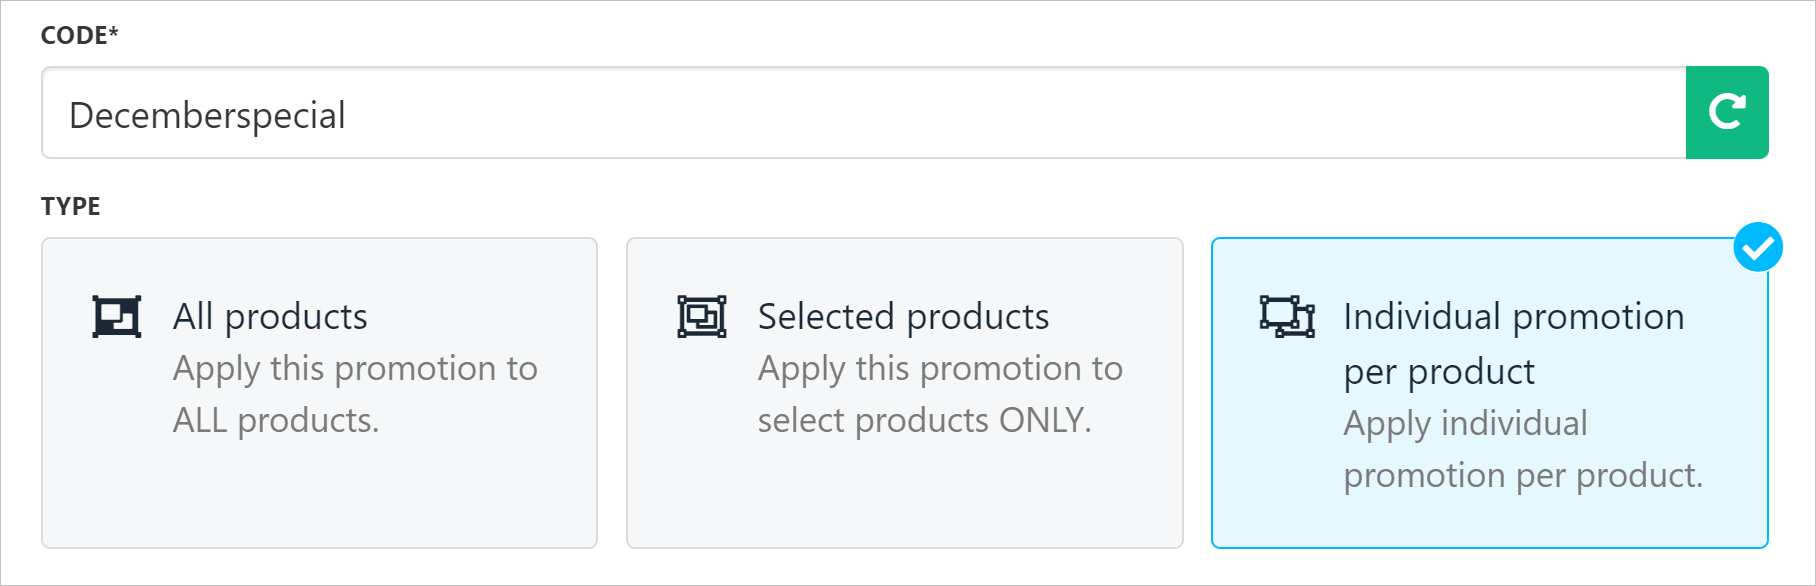 Choose Individual promotion per product